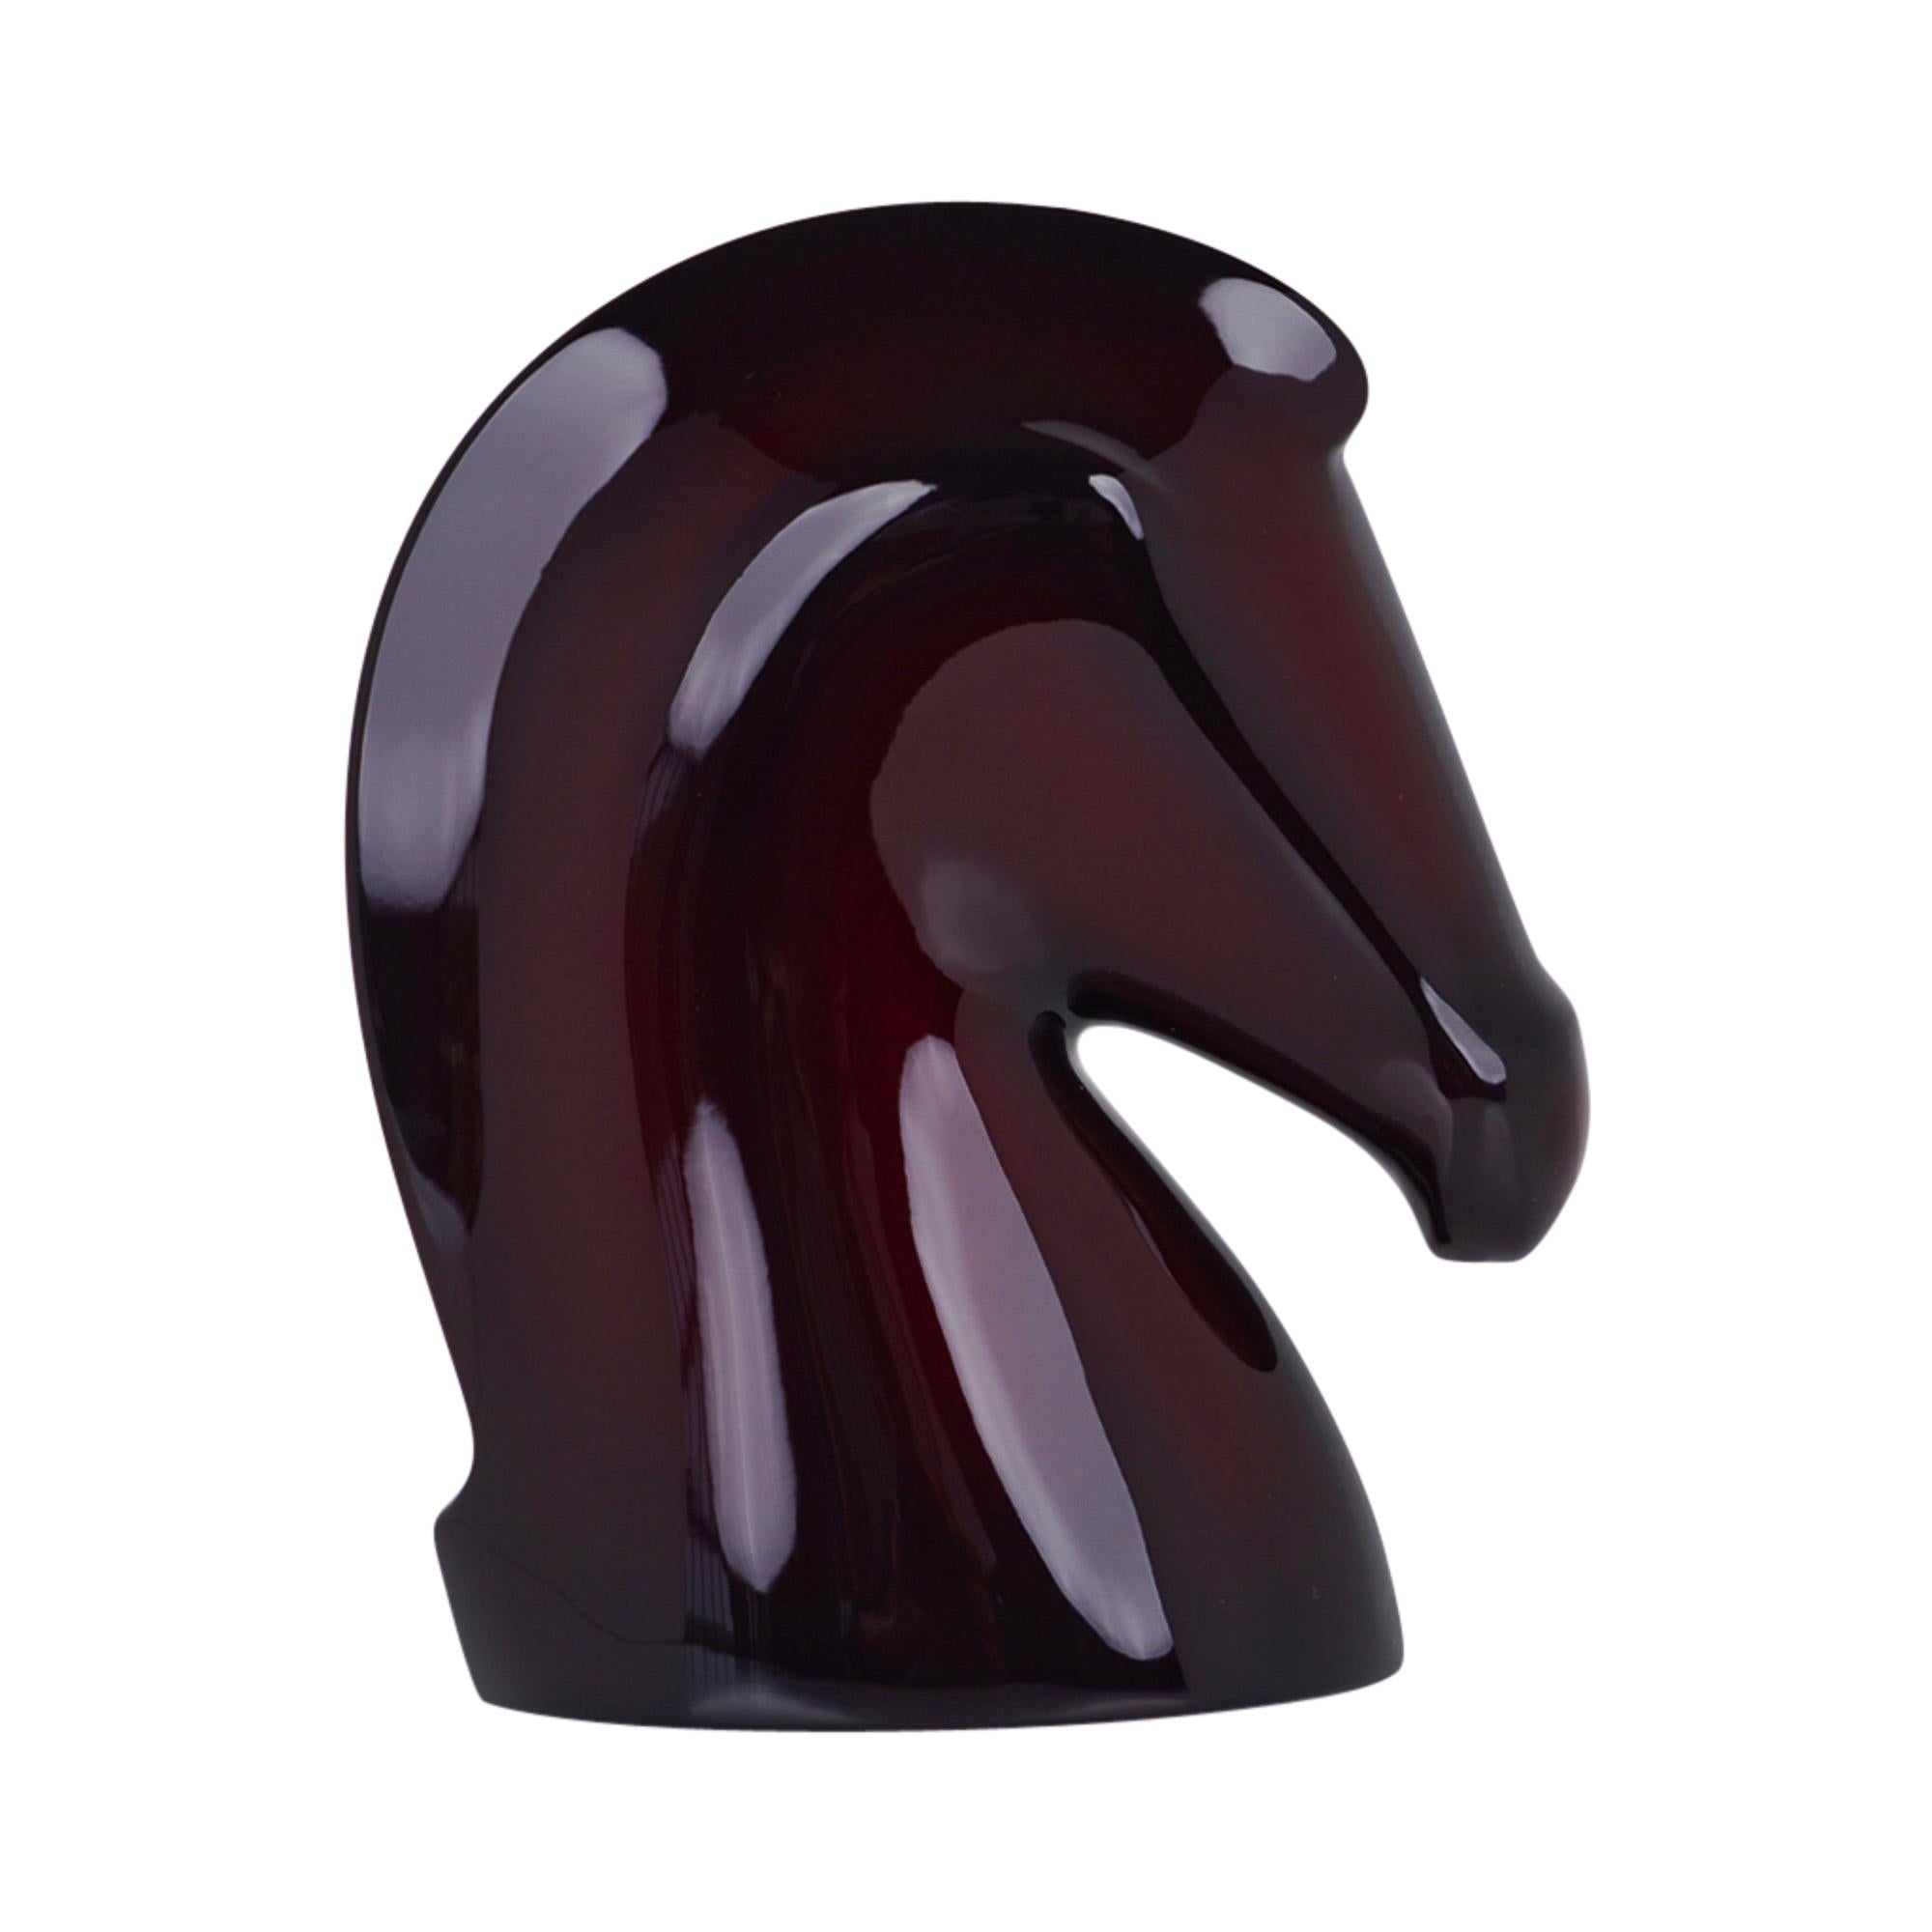 Black Hermes Samarcande Paperweight Aubergine Lacquered Wood New/ Box